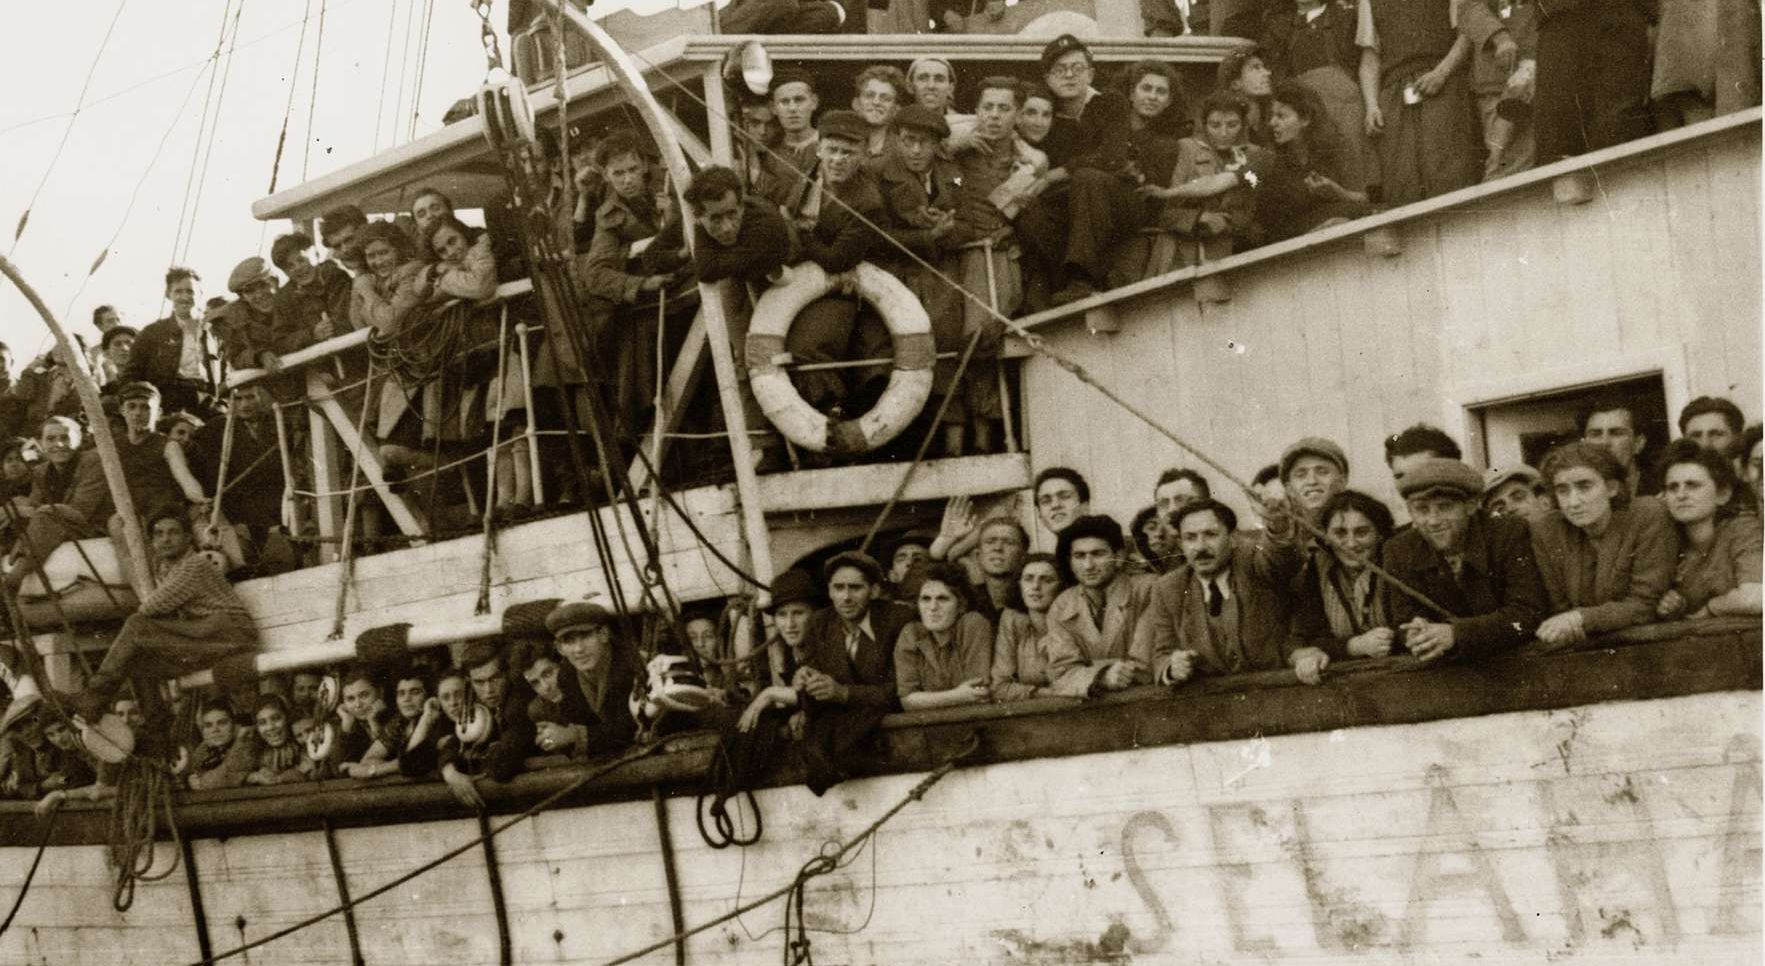 Hundreds of Jewish passengers escaped on the Selahattin to Palestine through Istanbul in 1944. FDR created the War Refugee Board that year to assist Jewish and other refugees, but earlier in the war he did little to help.. FDR Library.jpg